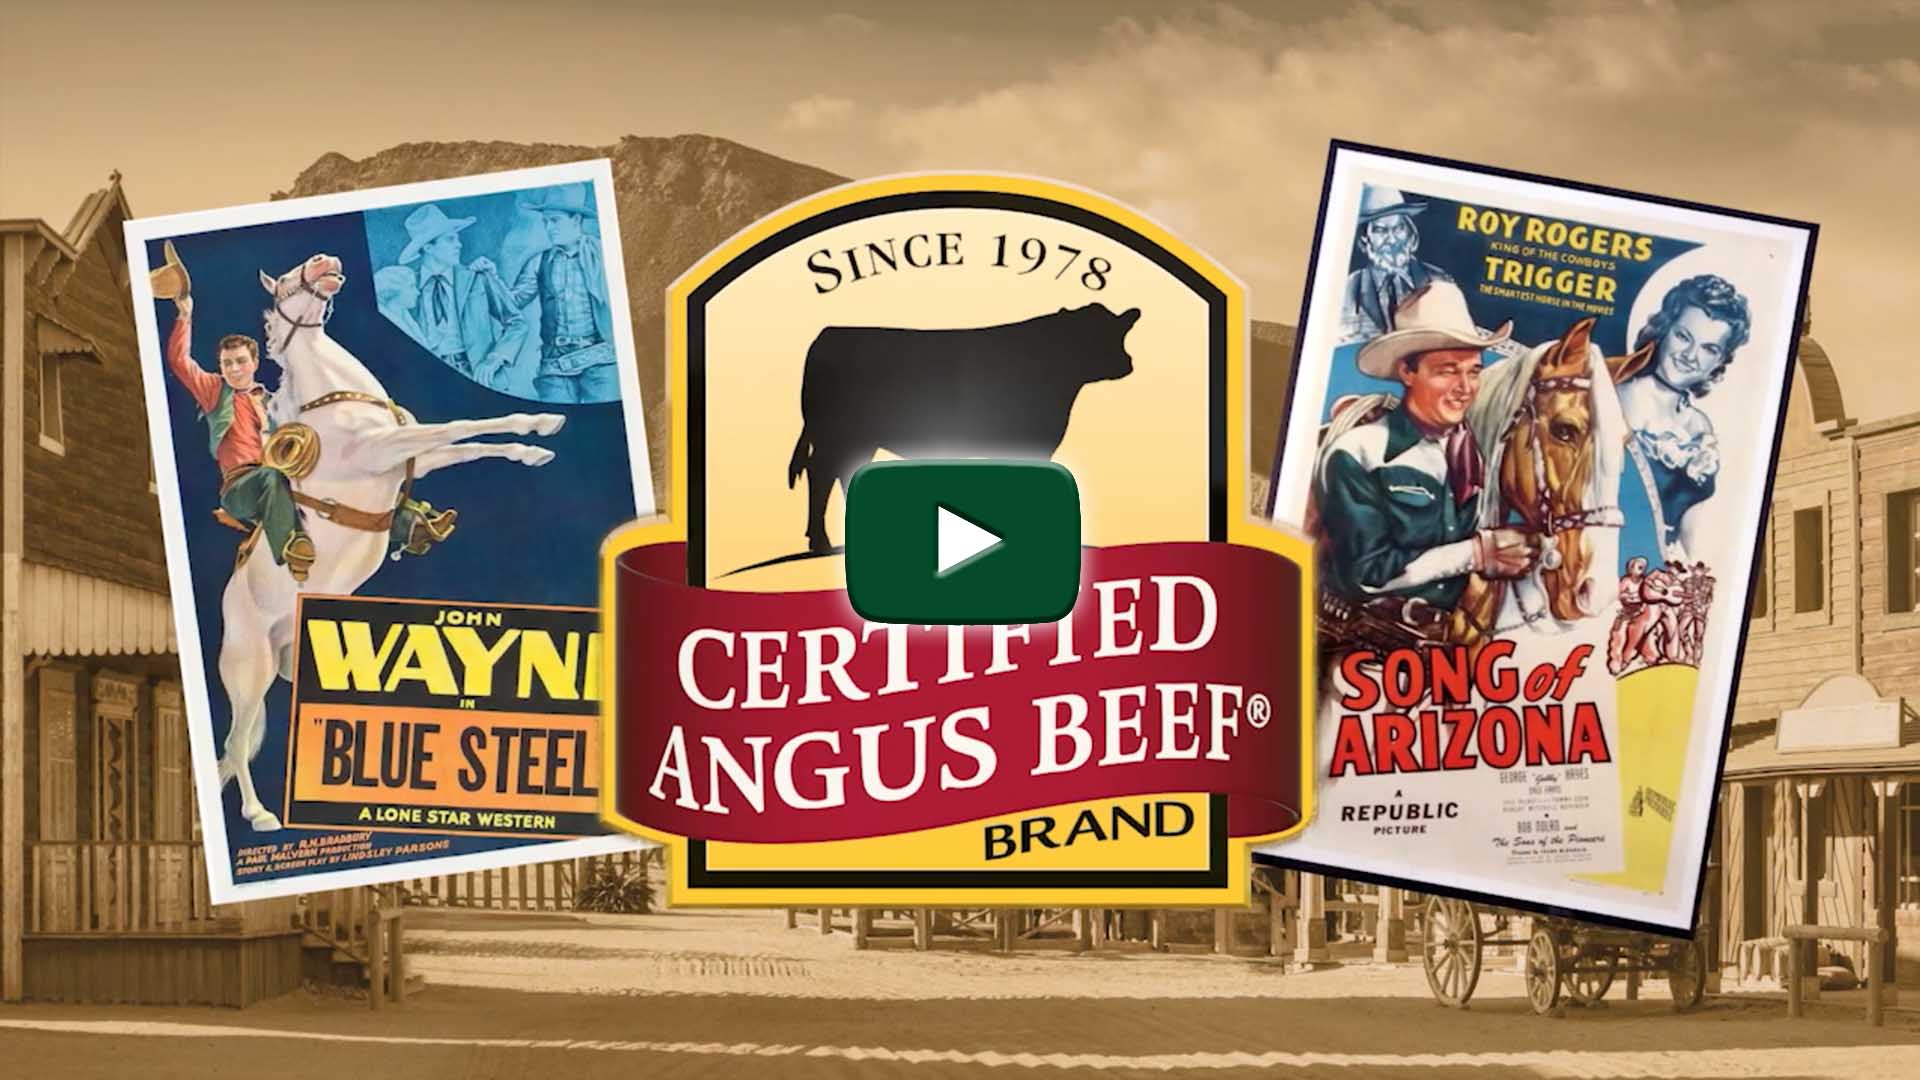 Certified Angus Beef Annual Conference KPG Creative